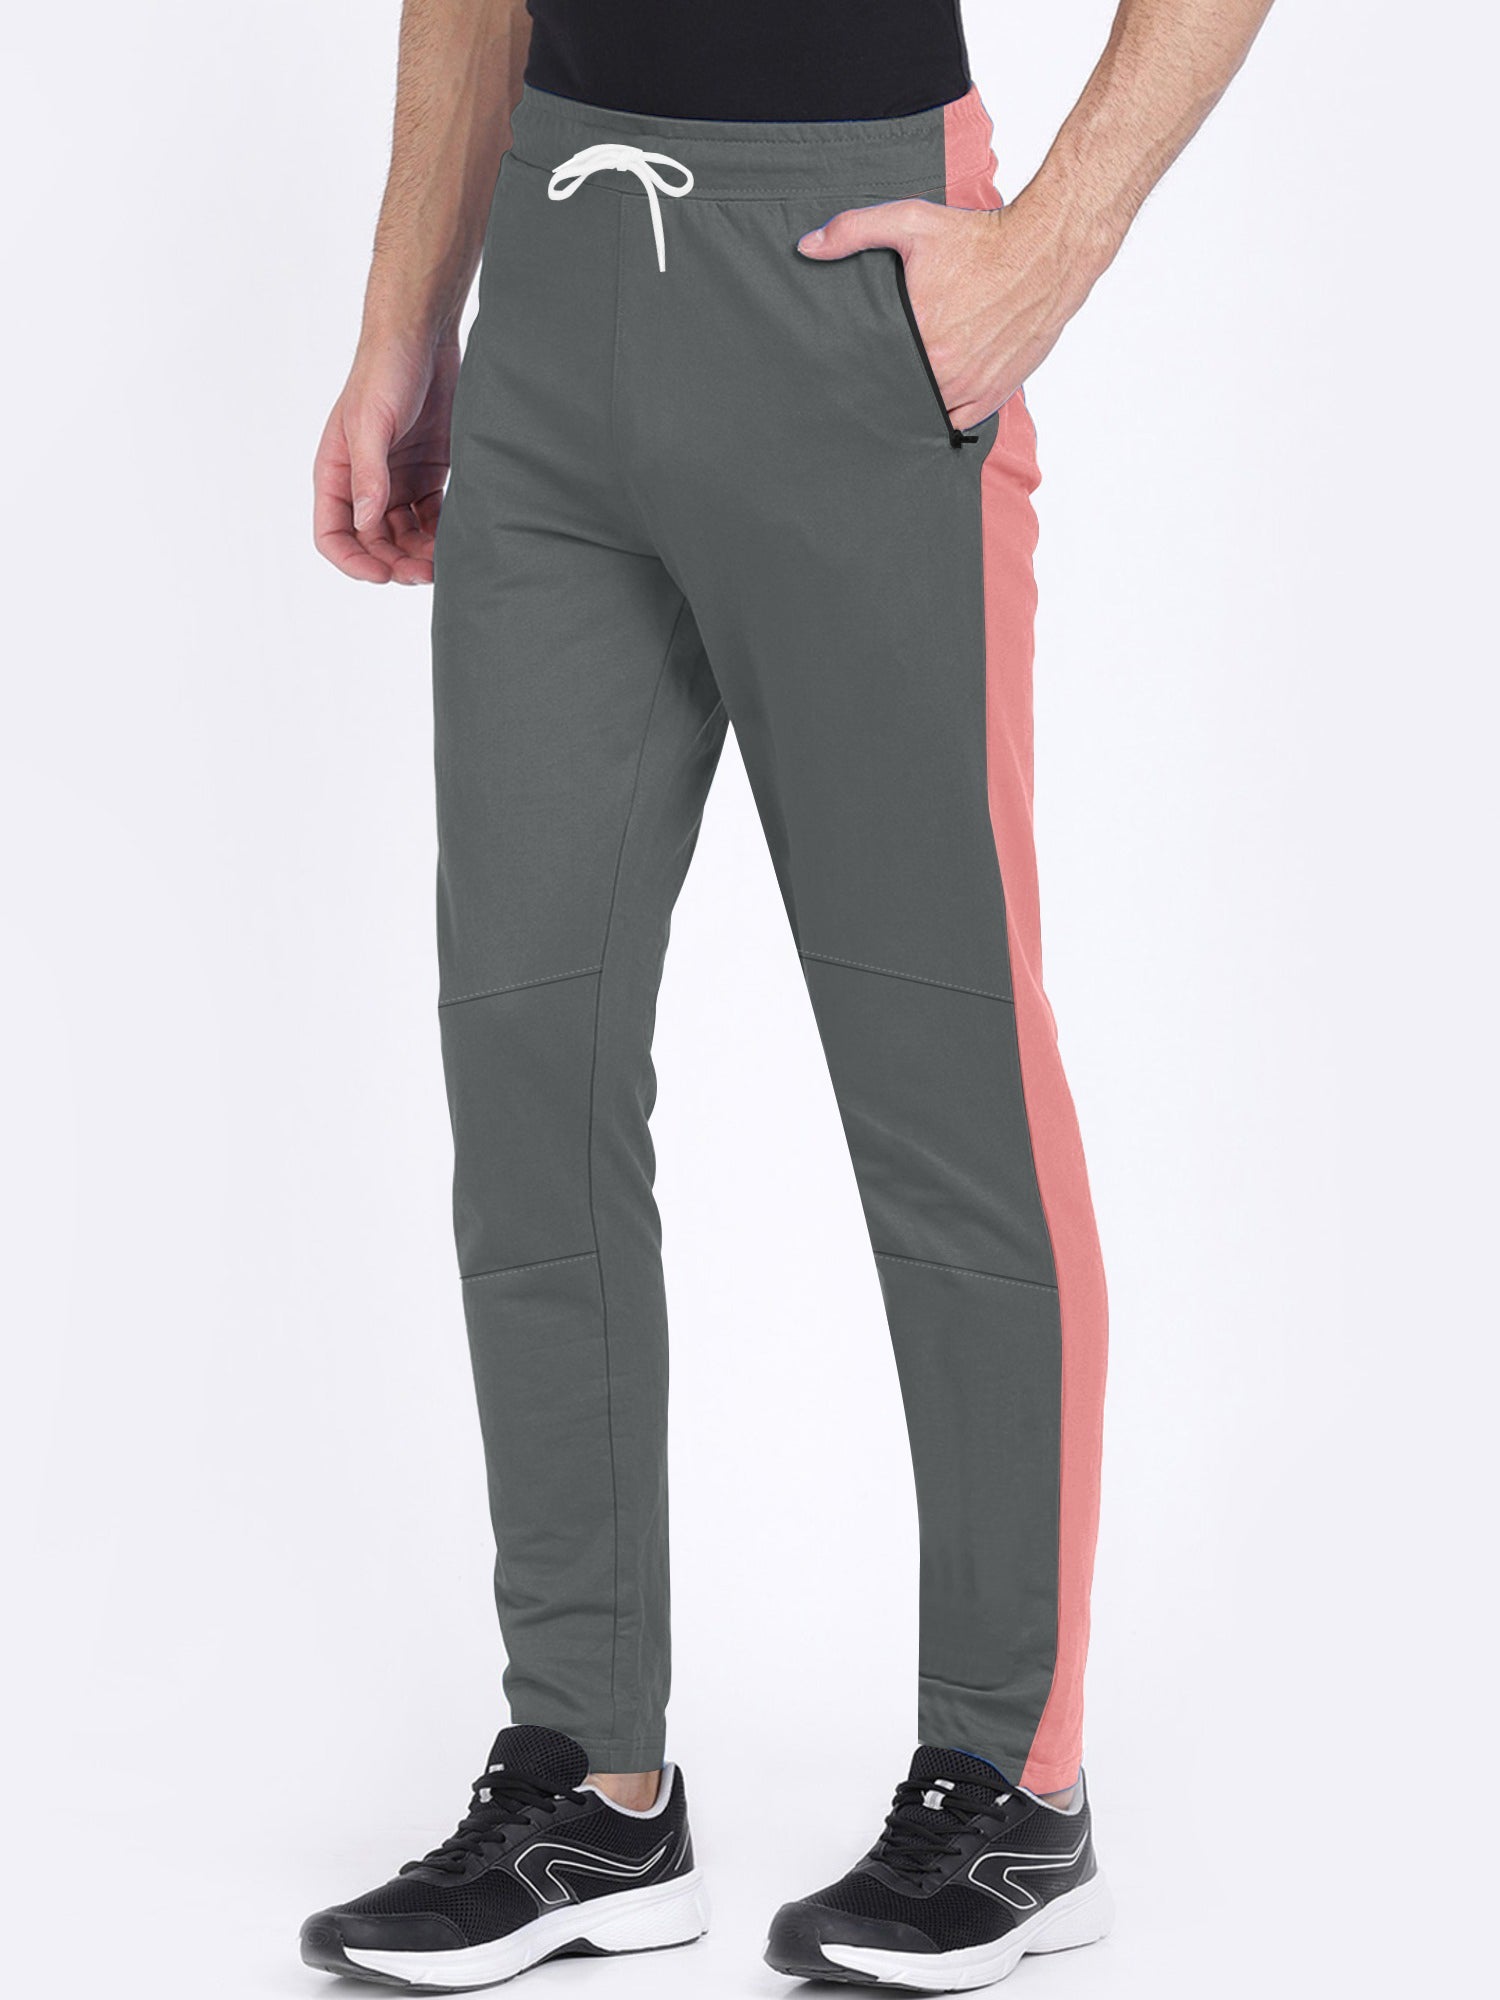 Summer Single Jersey Slim Fit Trouser For Men-Grey With Pink Stripes-SP137/RT2103